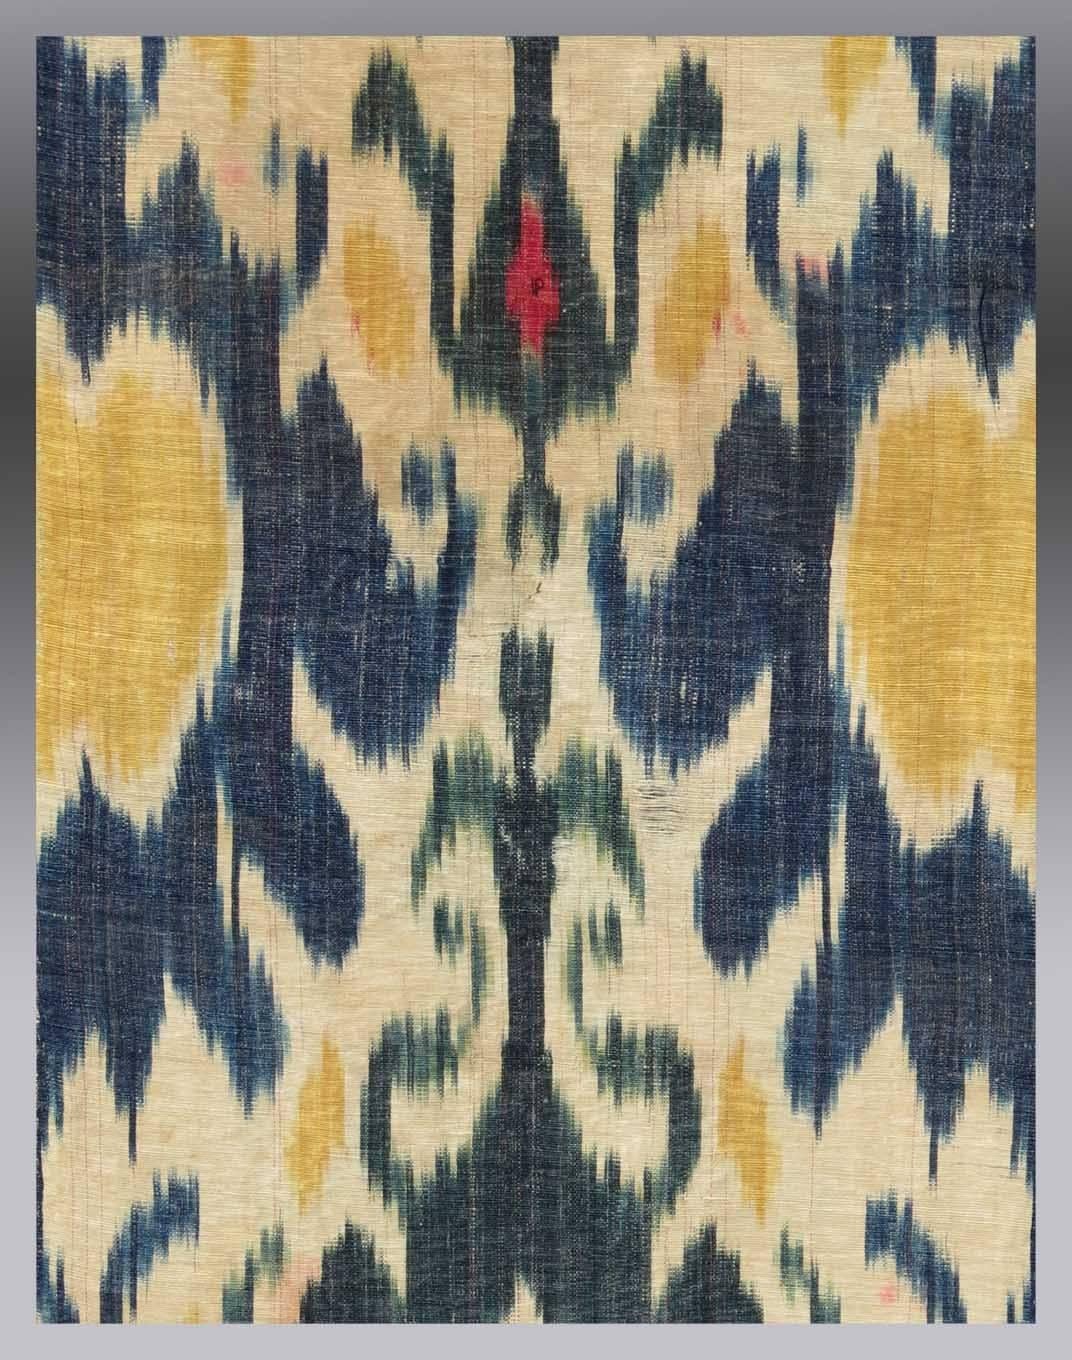 Antique Uzbek Ikat Panel, Central Asia, 19th Century In Good Condition For Sale In By Appointment Only, CA